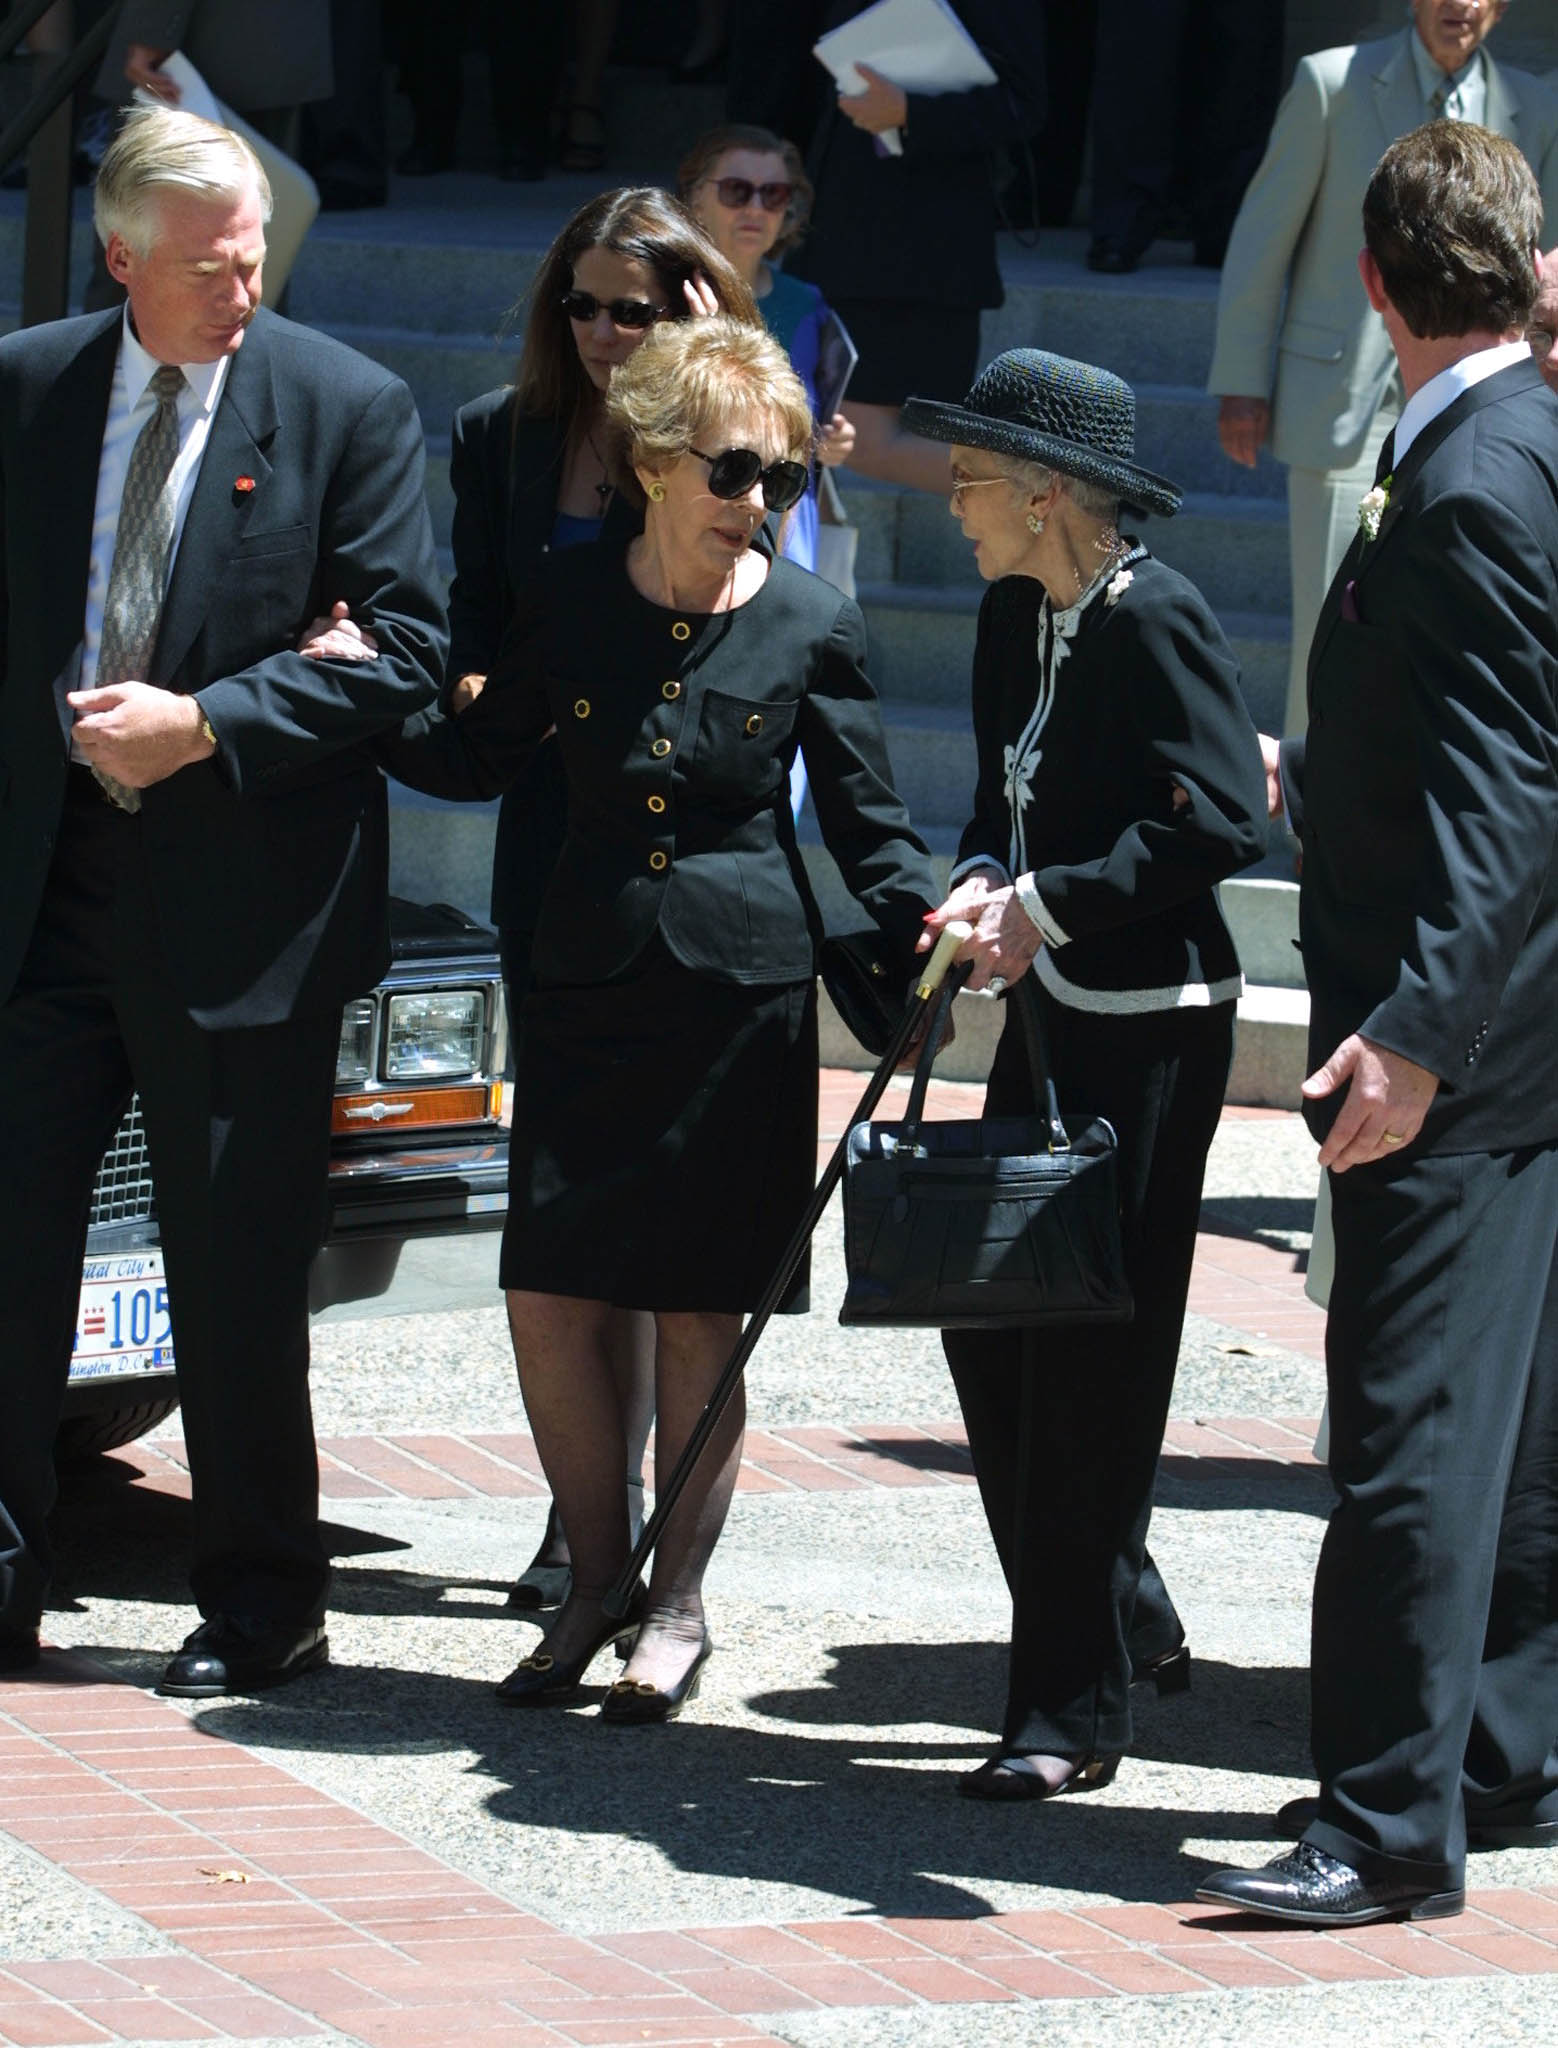 Former US first lady Nancy Reagan (2nd L) talks with Jane Wyman  after the funeral of Maureen Reagan at the Cathedral of the Blessed Sacrament August 18, 2001, in Sacramento, California. (Getty)